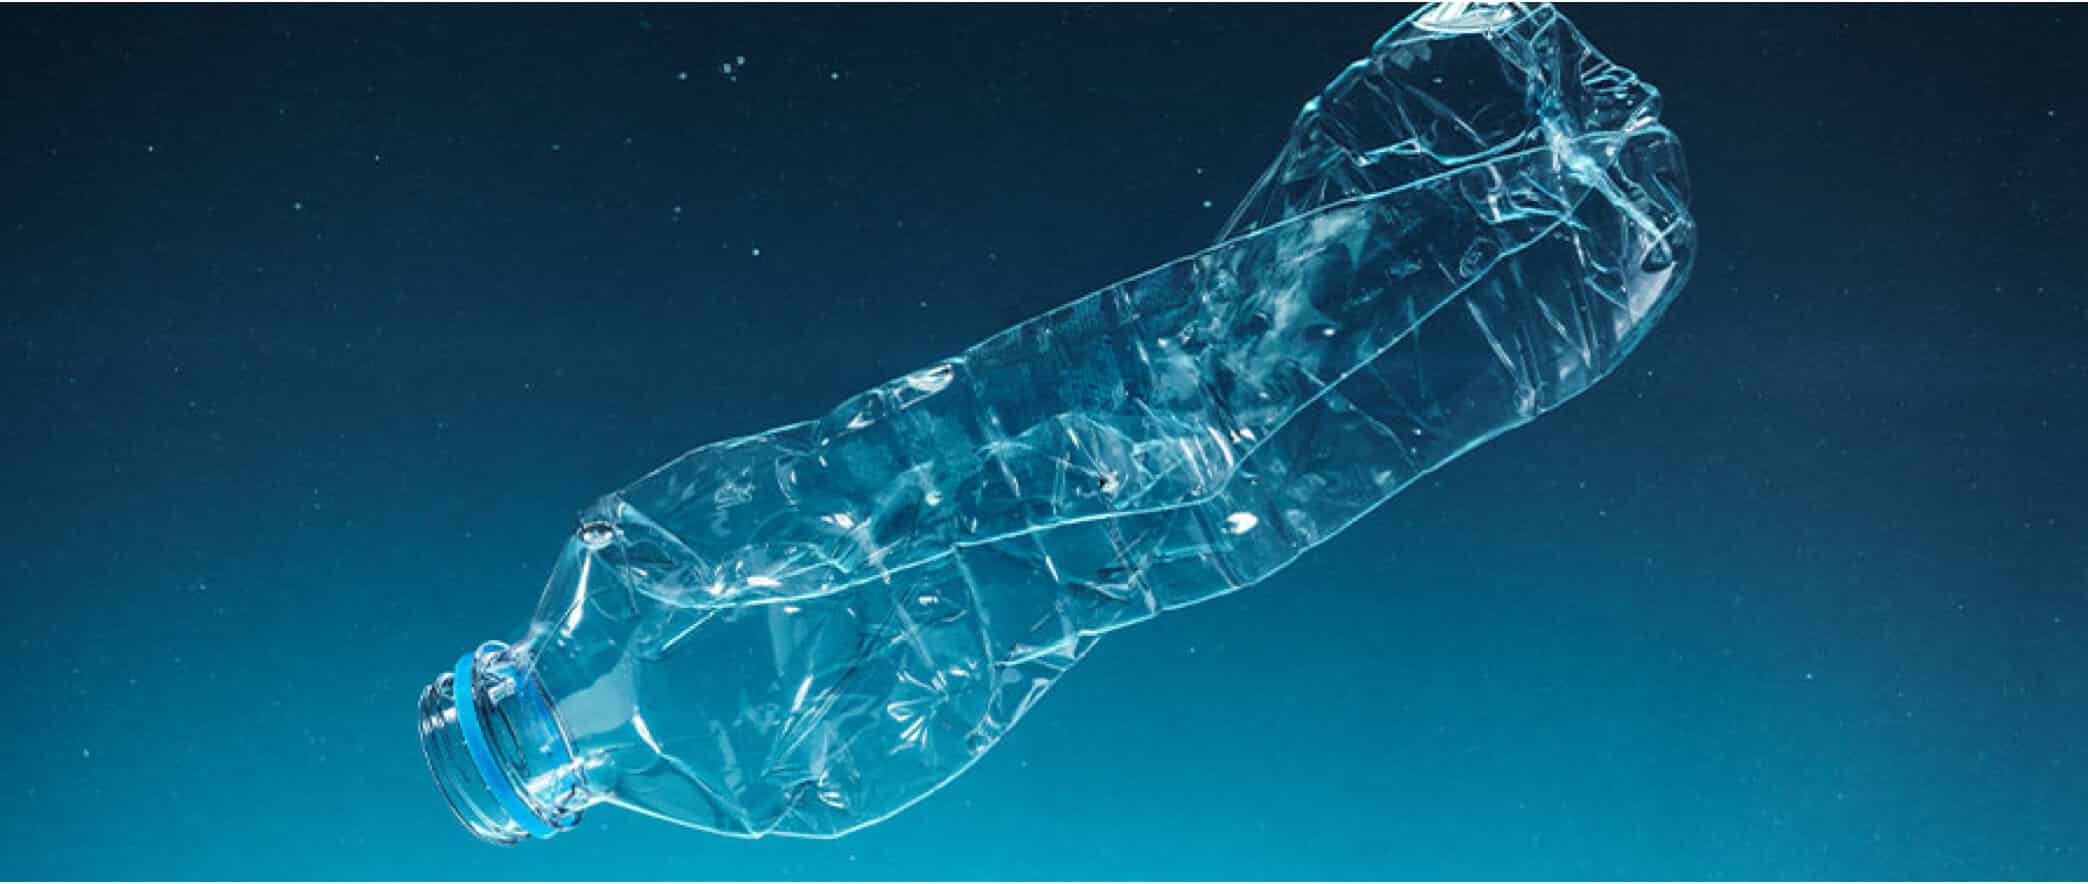 Plastic is found in bottled water around the world